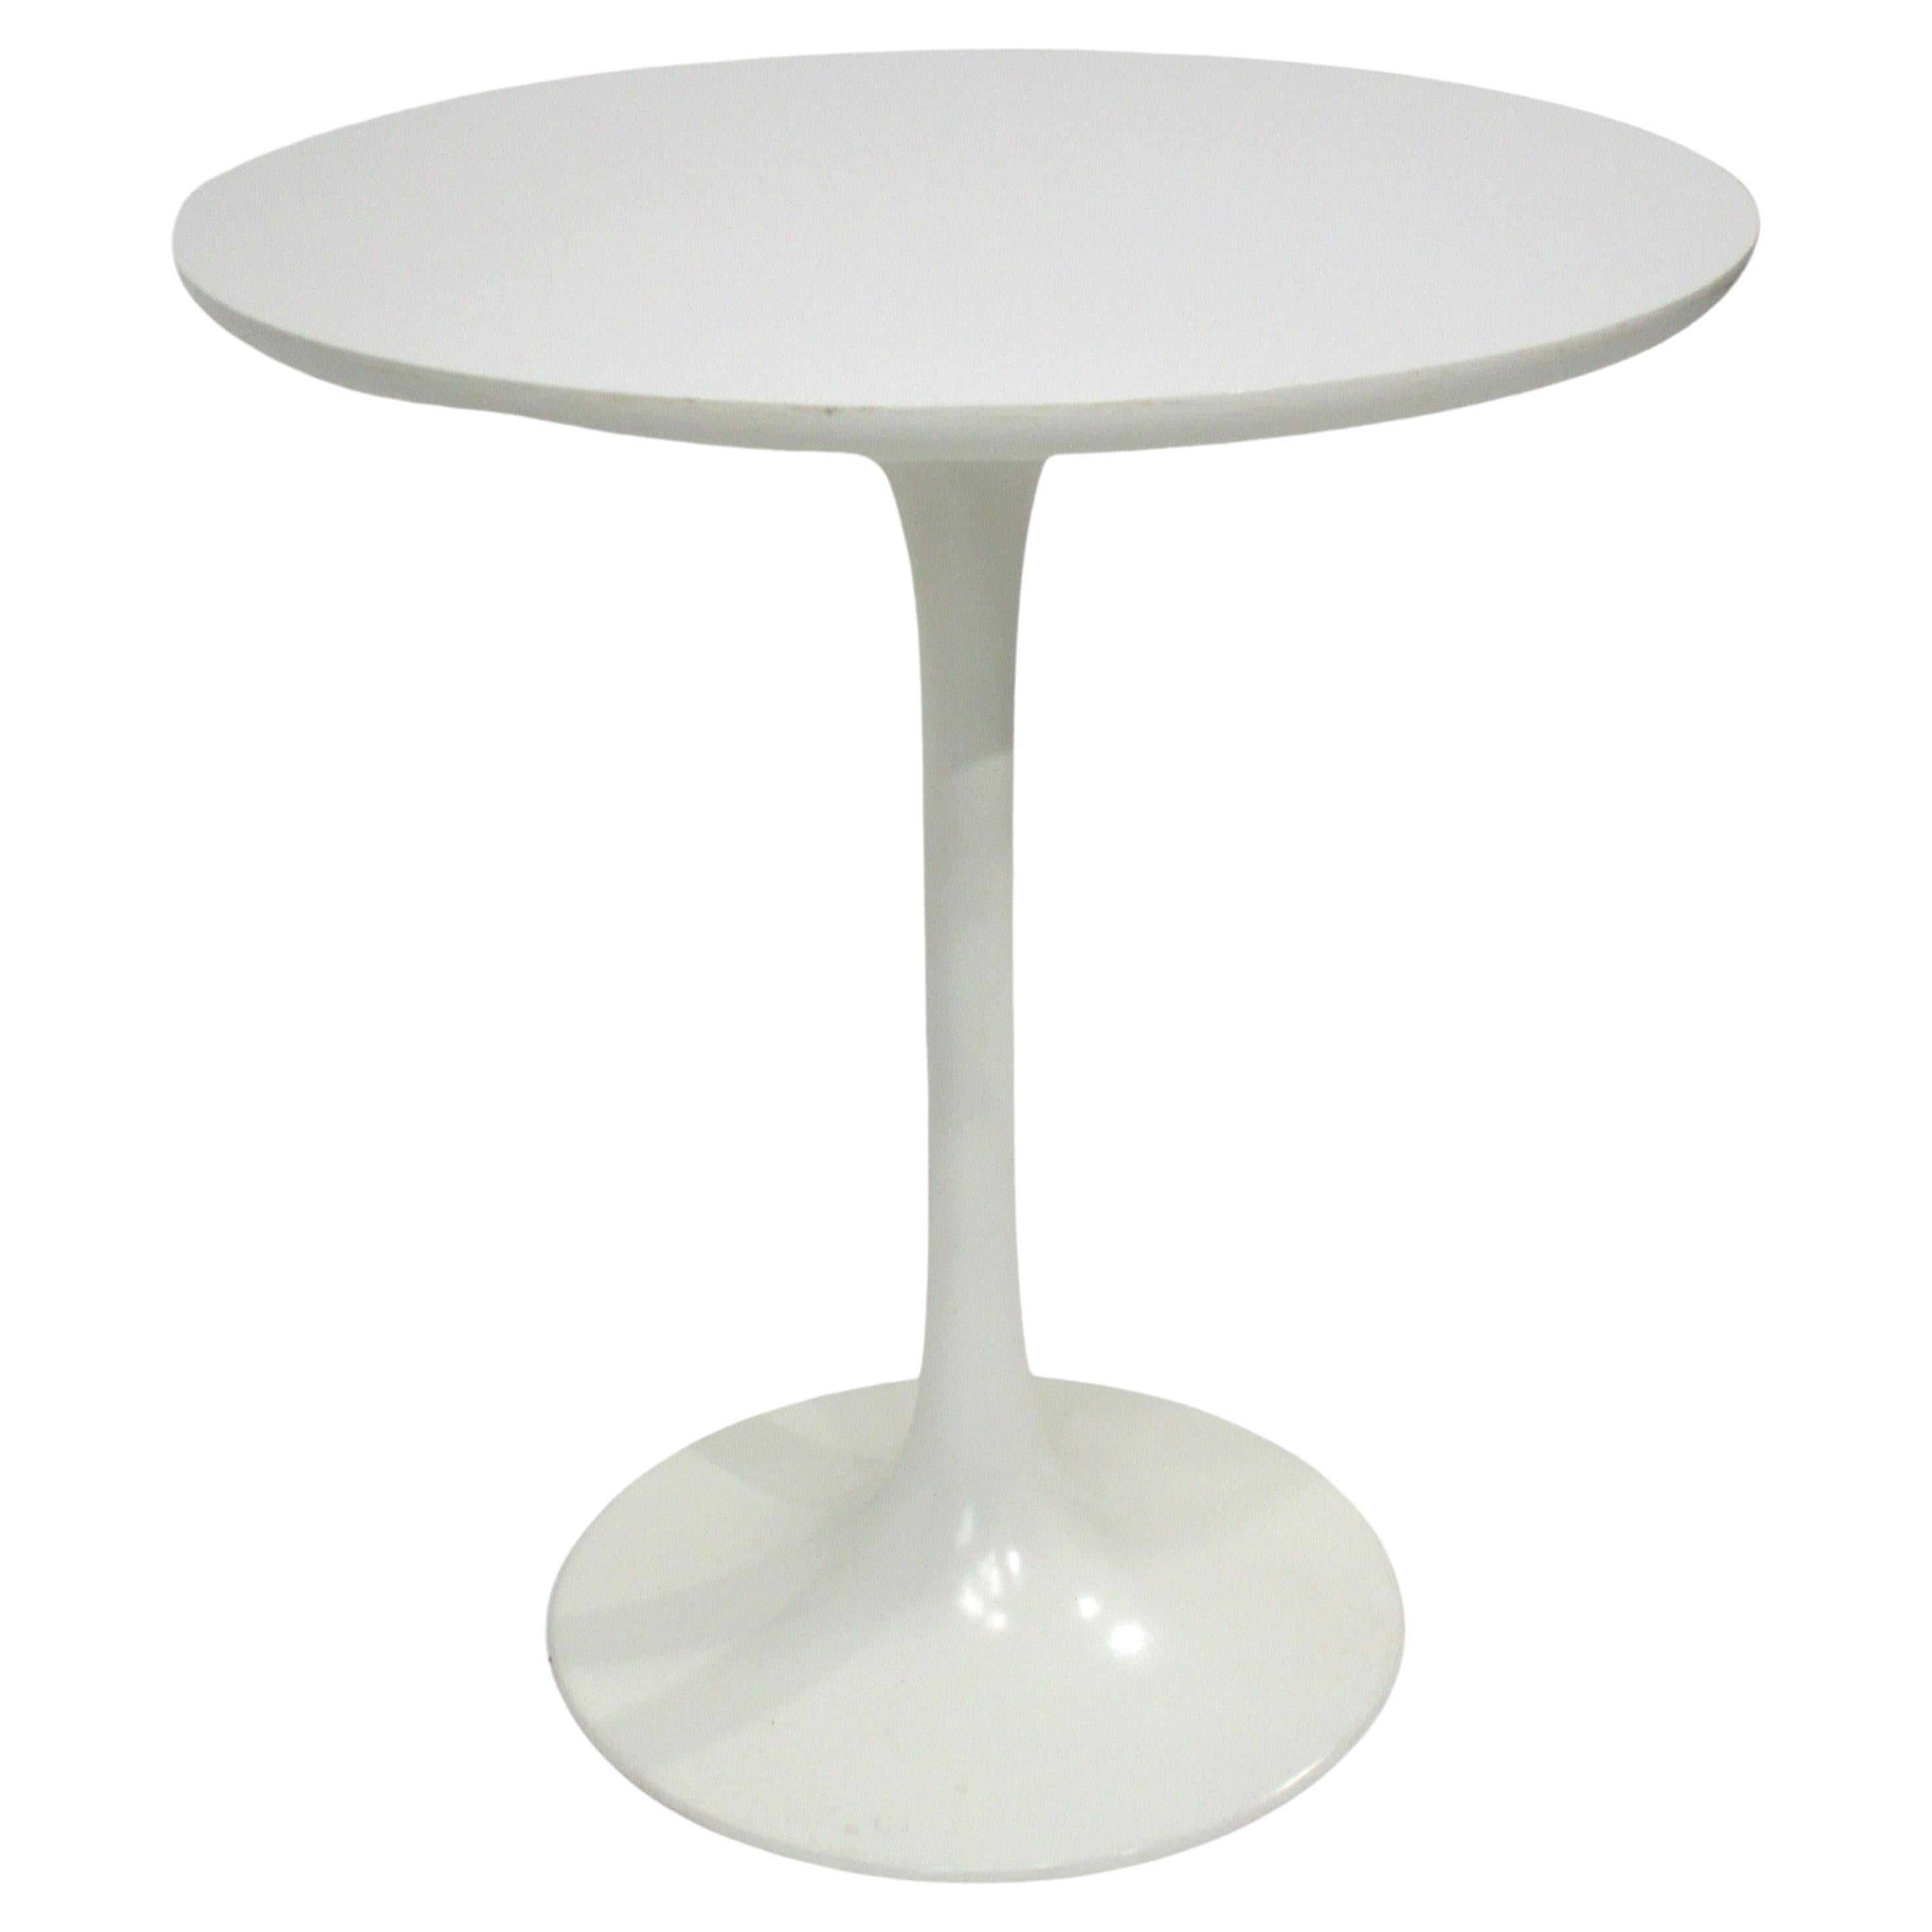 Why is it called a tulip table?